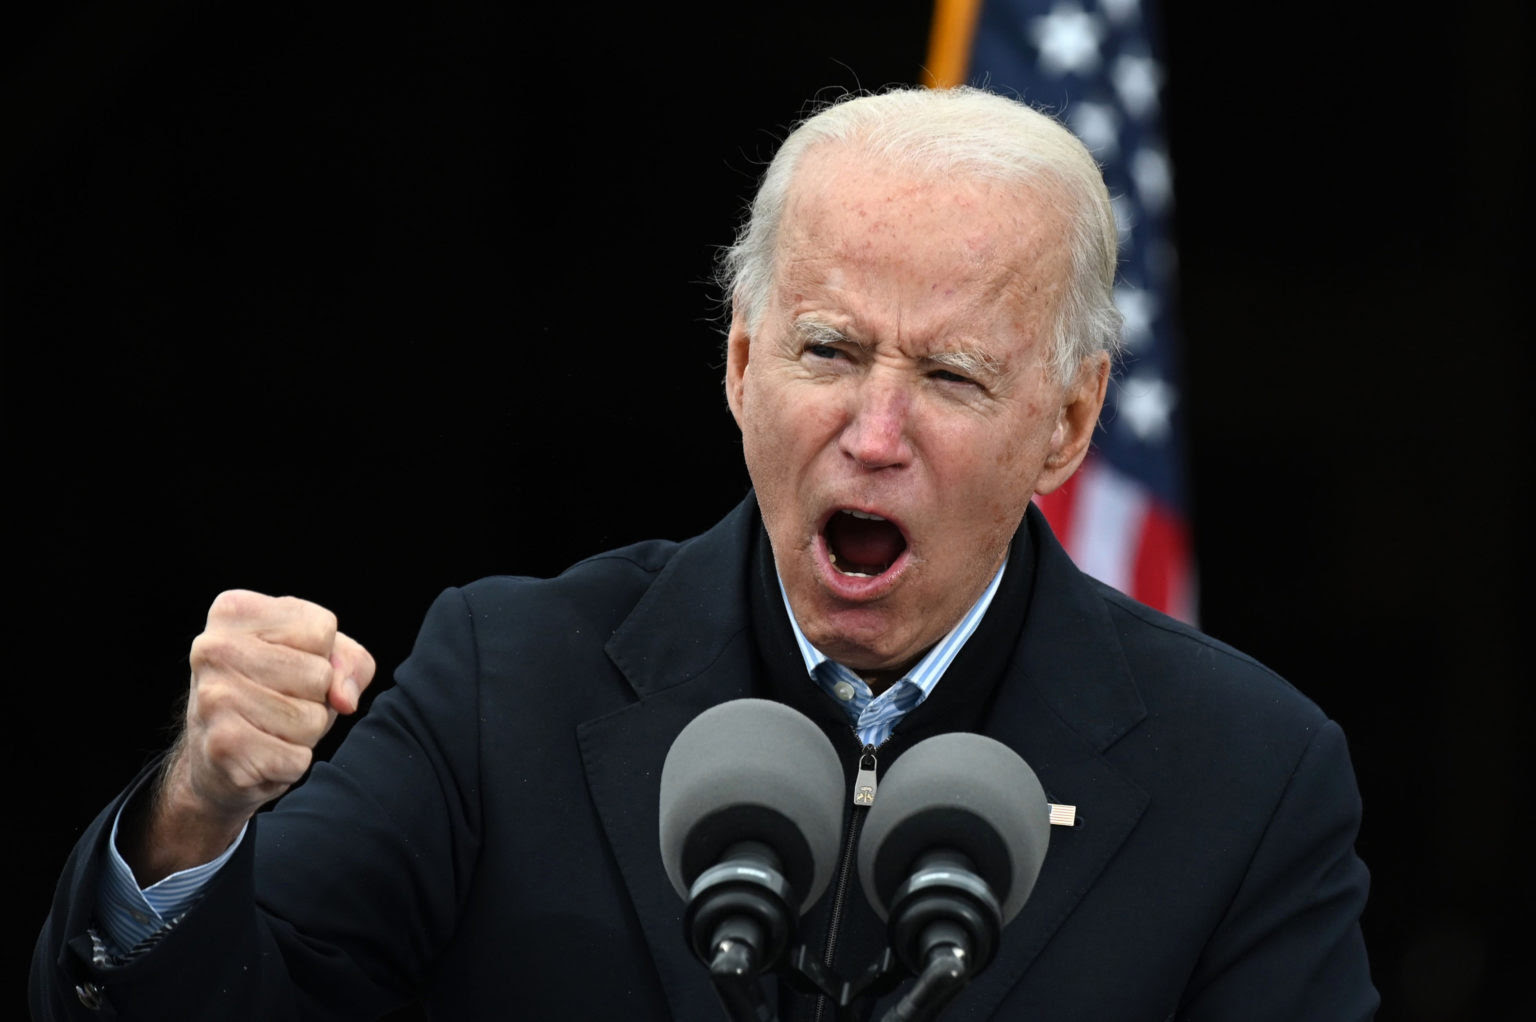 Failure-in-Chief! Biden's Done Diddly-Squat for America...